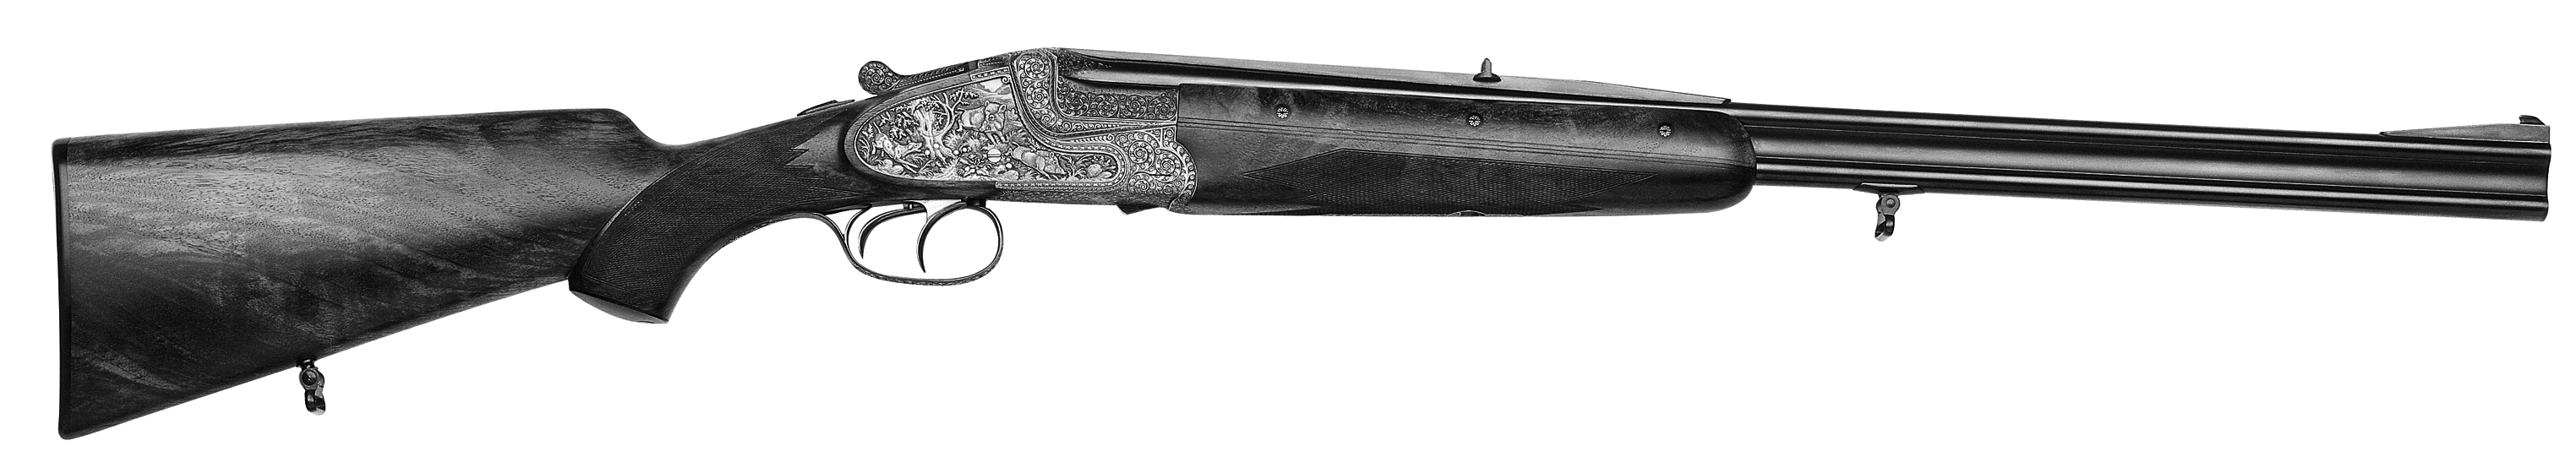 Model 323E Over/Under Double Rifle